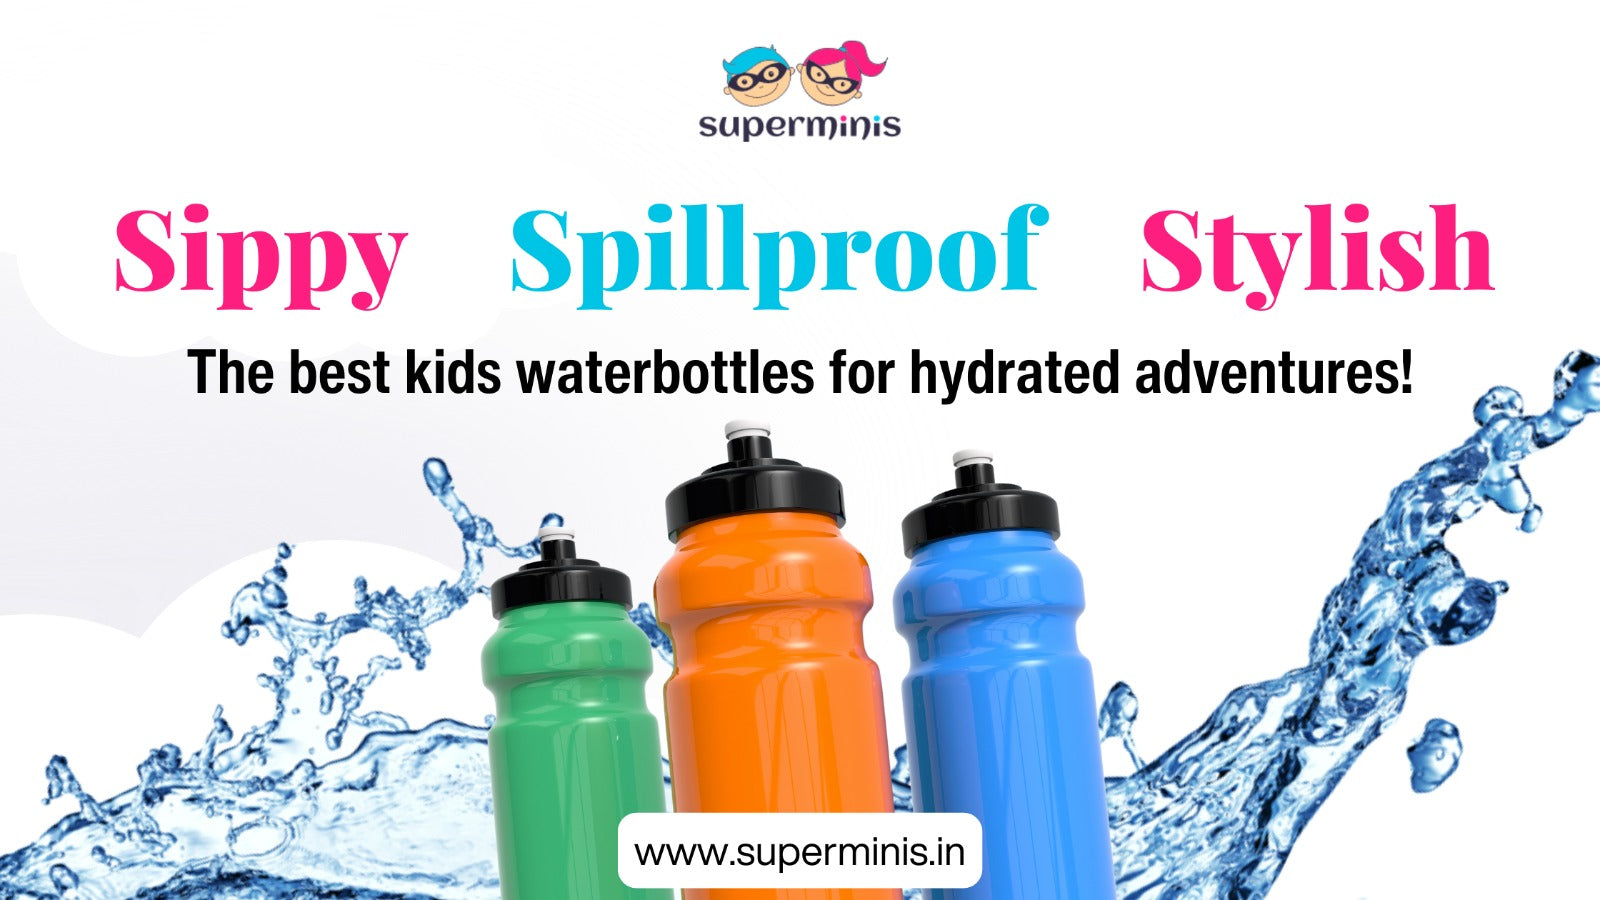 Sippy, Spill-Proof, and Stylish: The Best Kids Water Bottles for Hydrated Adventures!